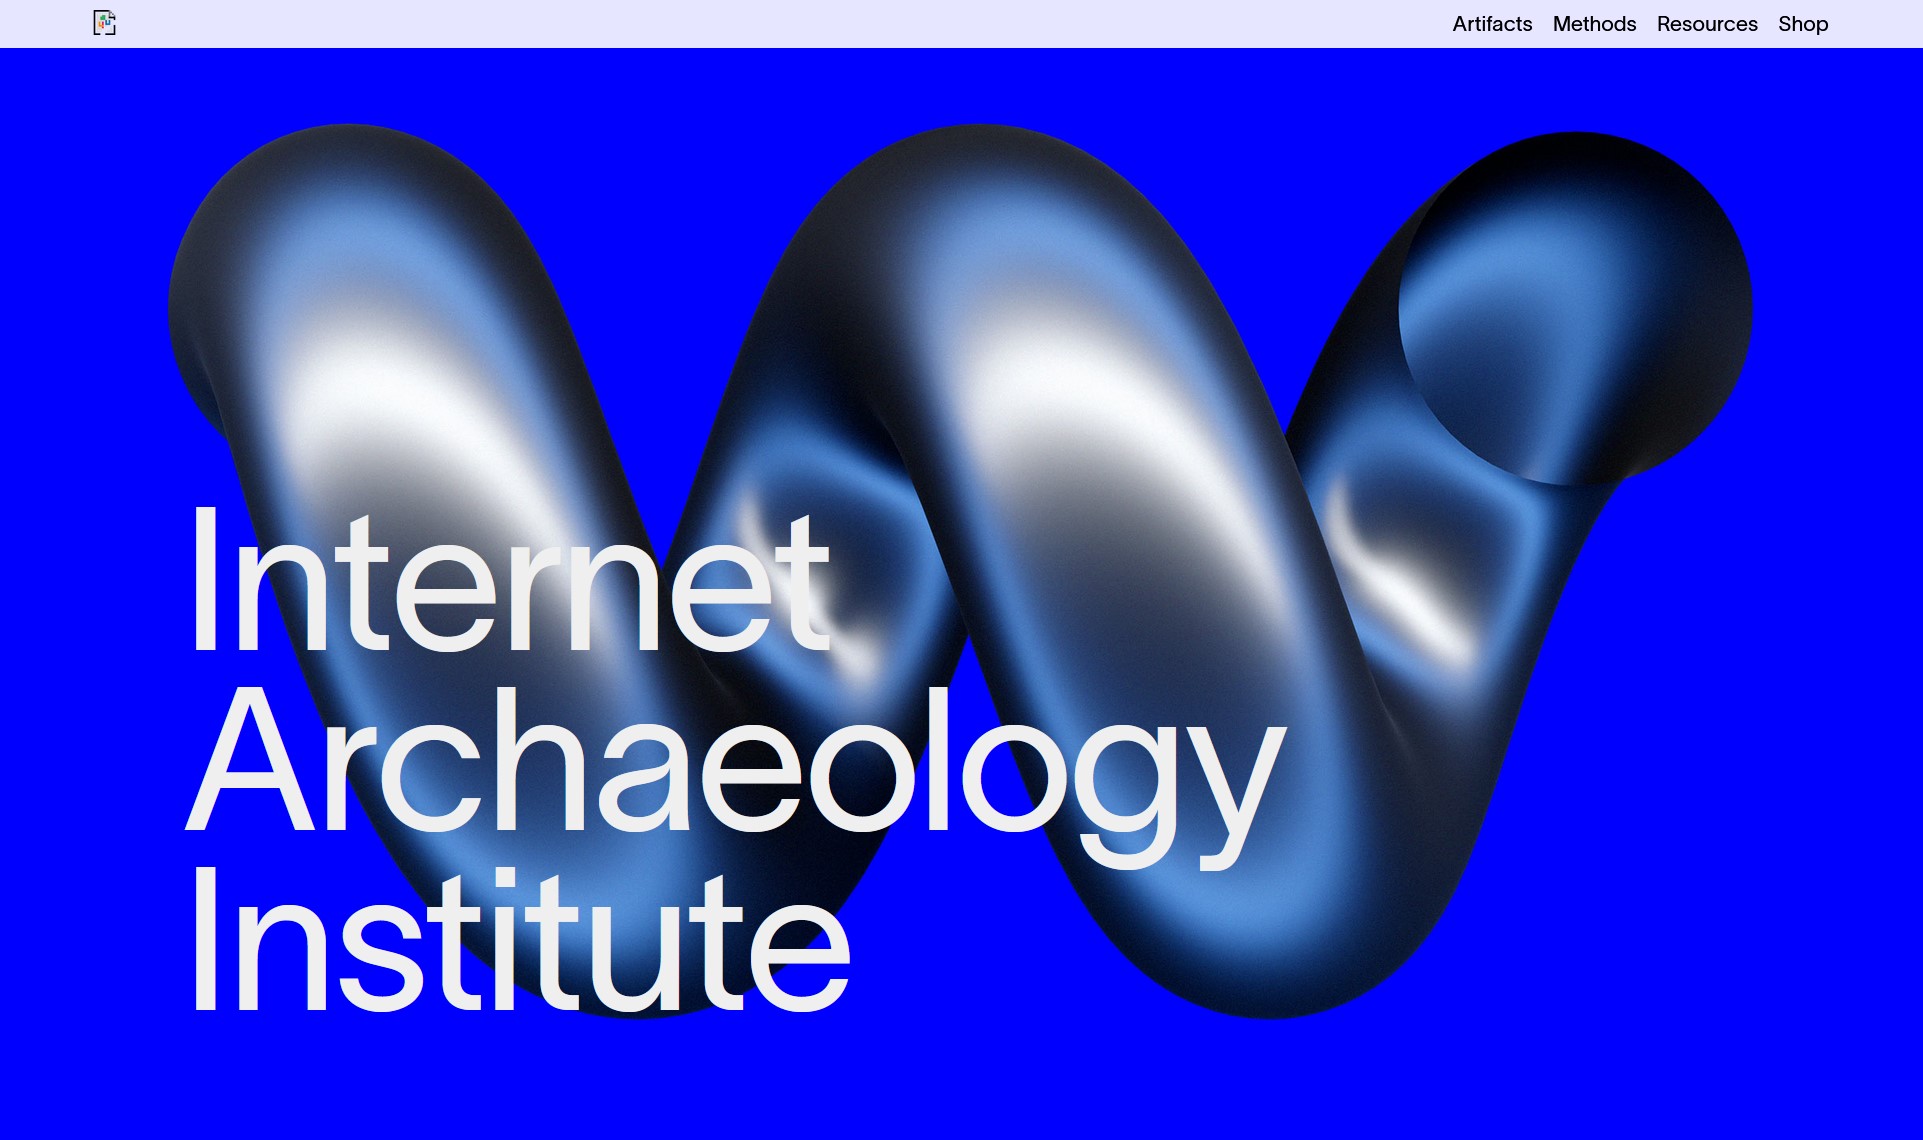 Internet Archaeology Institute Richard Ley Call for Creatives